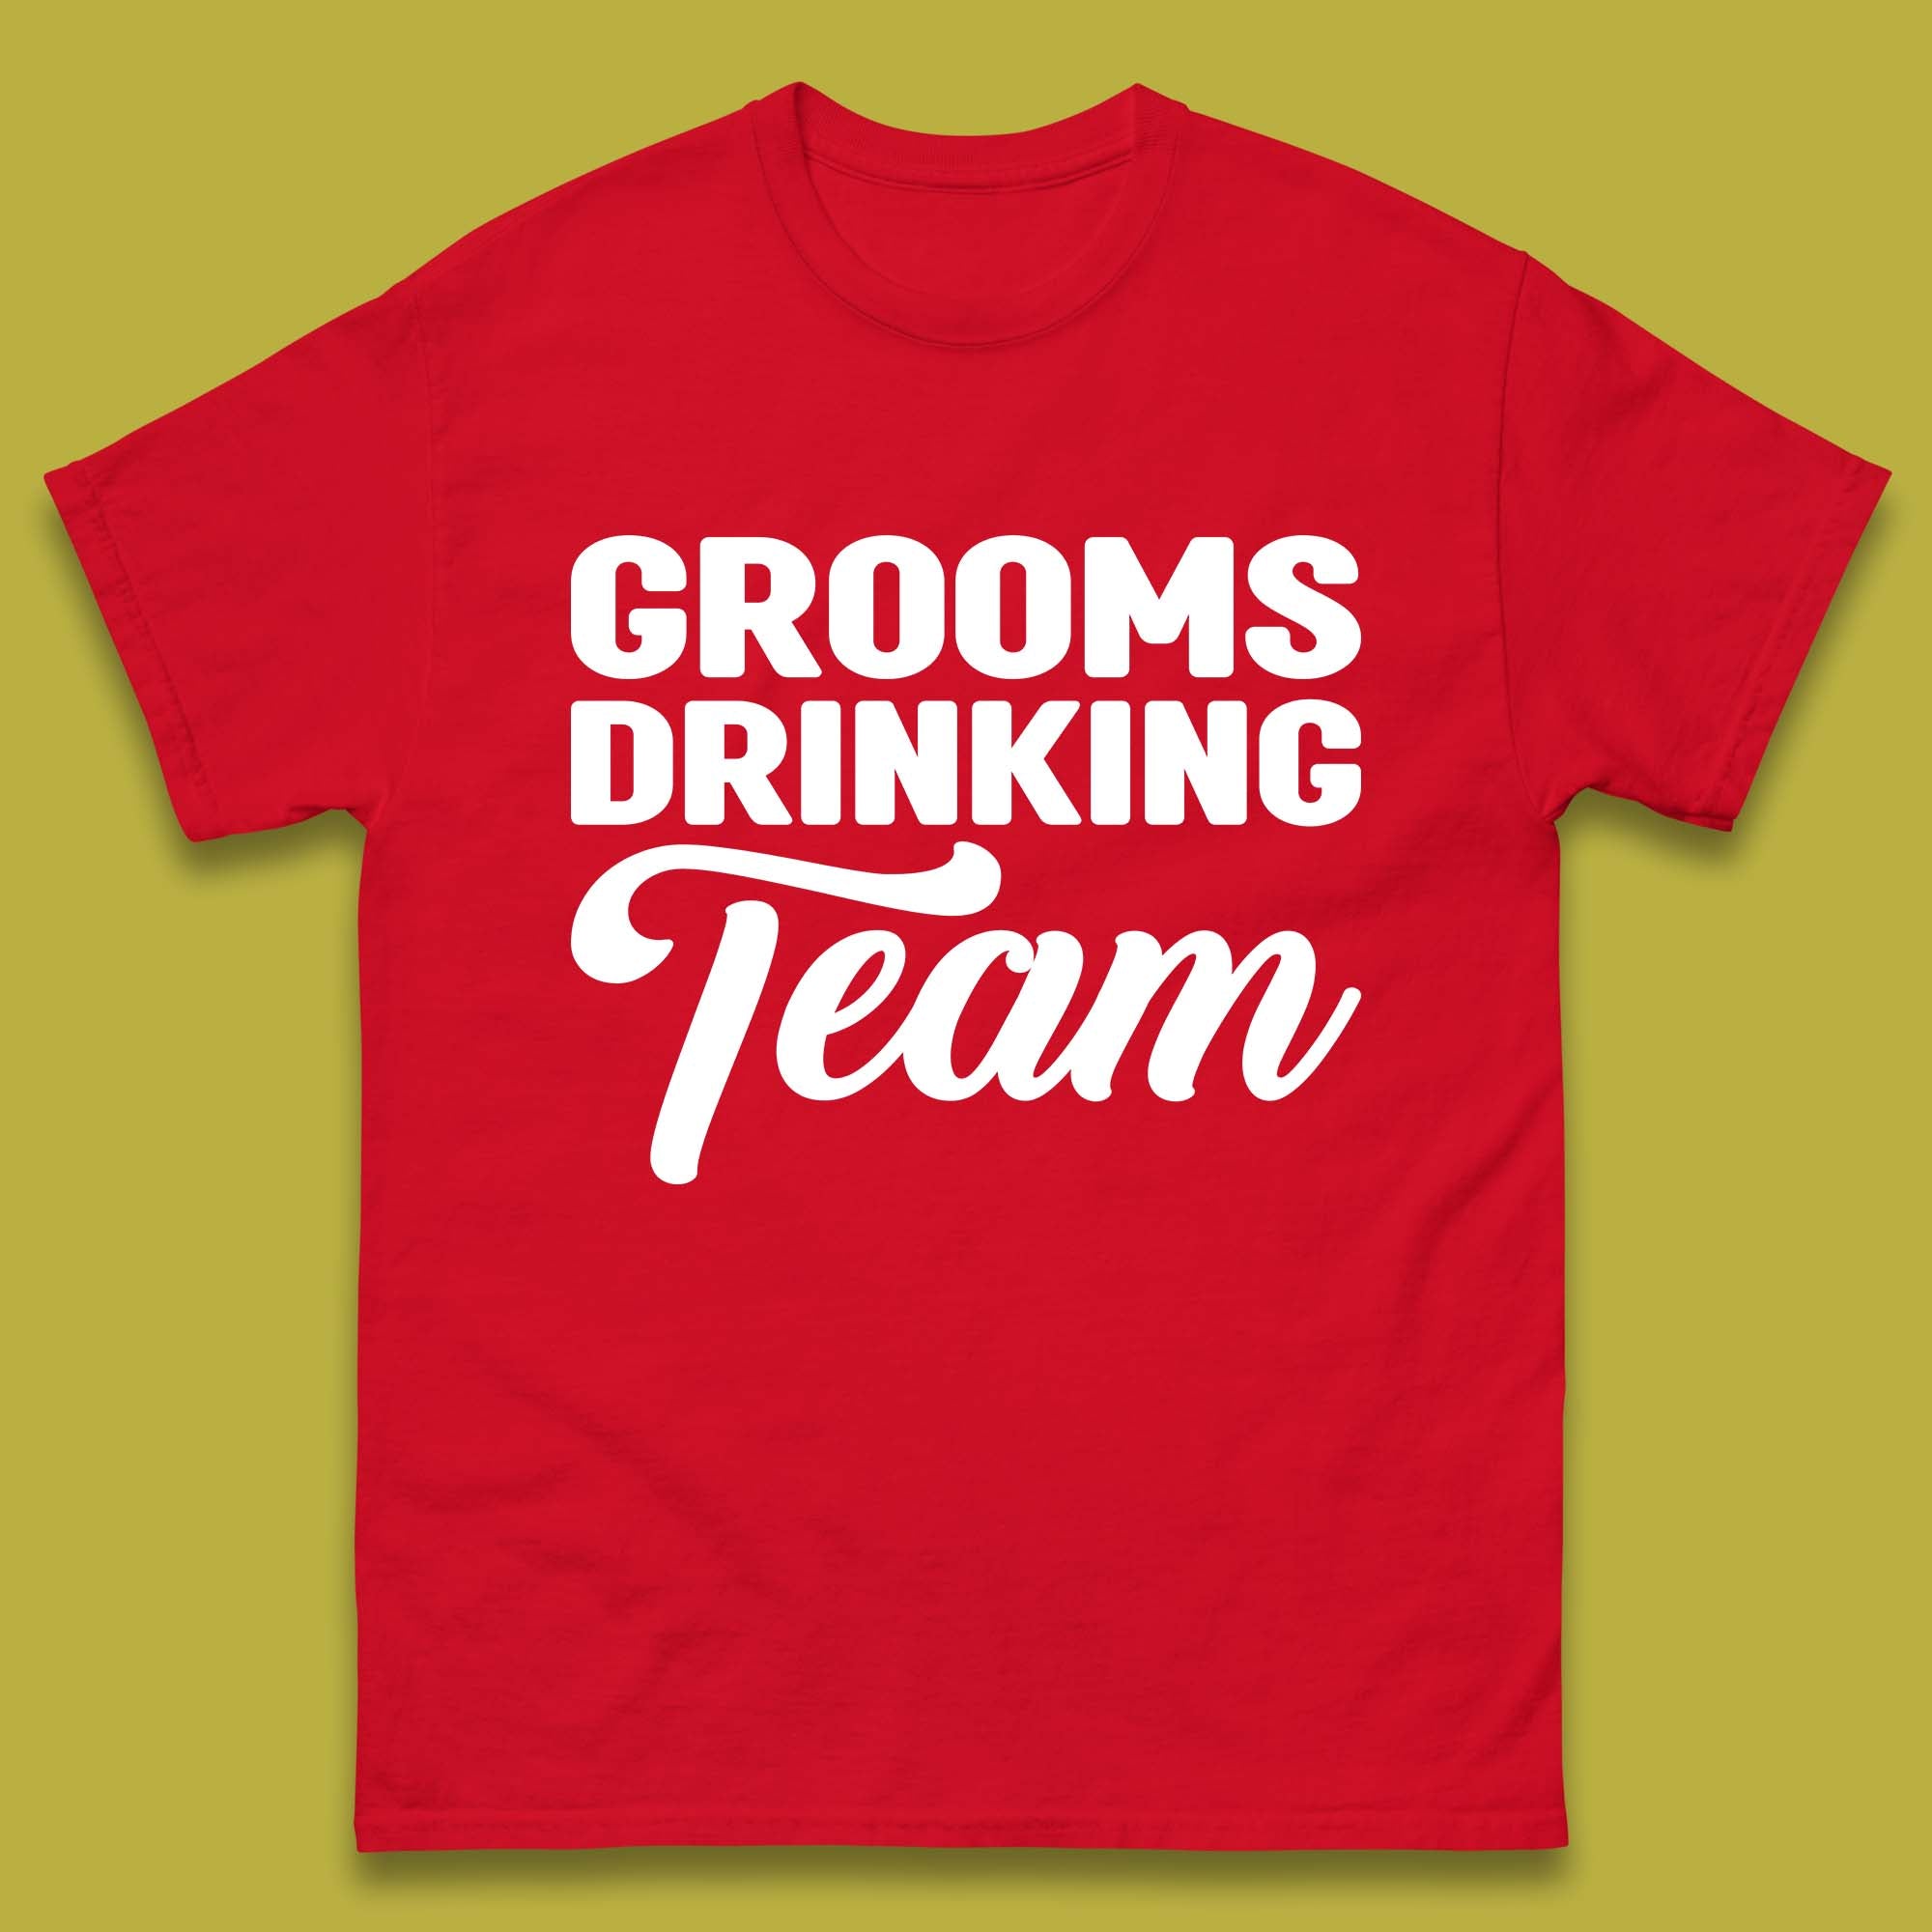 Groom Drinking Team Funny Bachelor Party Wedding Drinking Team Mens Tee Top